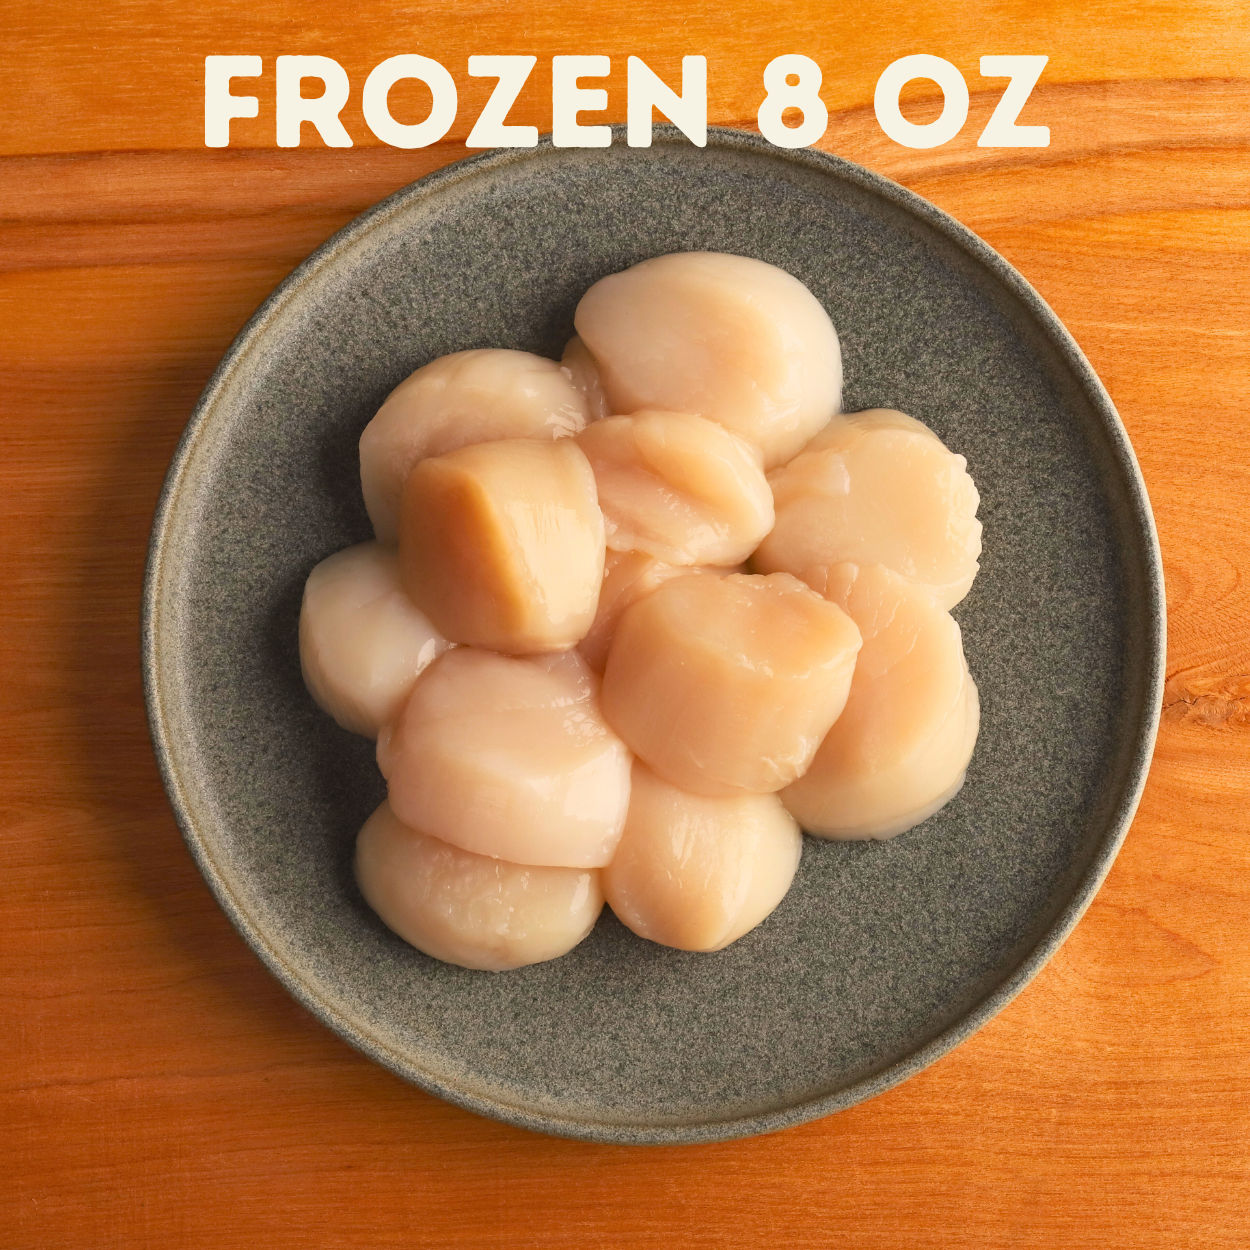 Frozen Dayboat Scallops by the 1/2 Pound